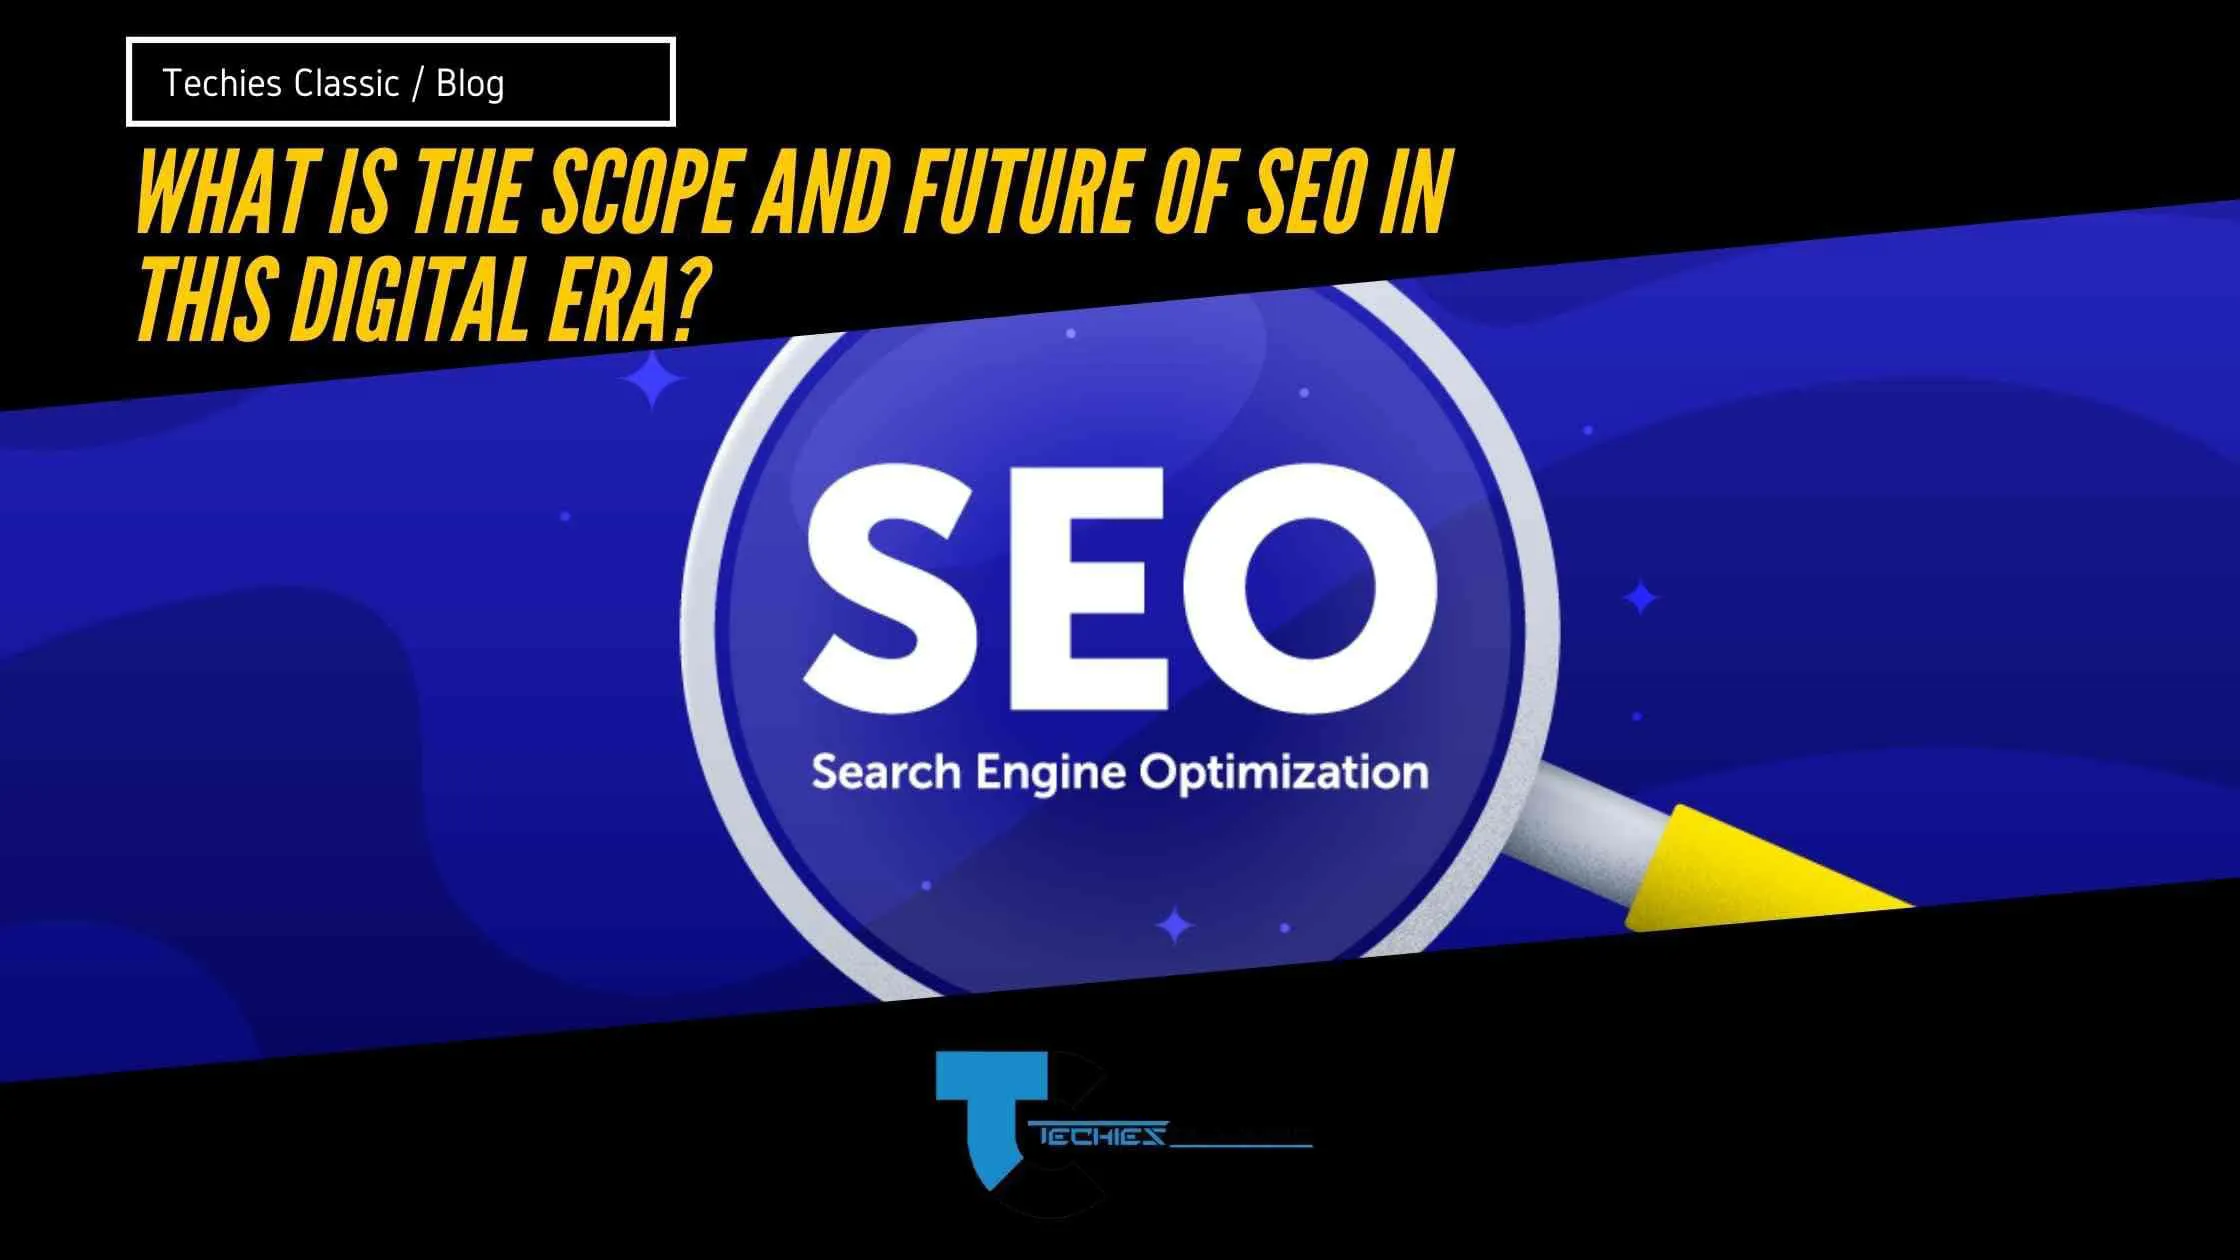 What is the Scope And future of SEO in this digital era?